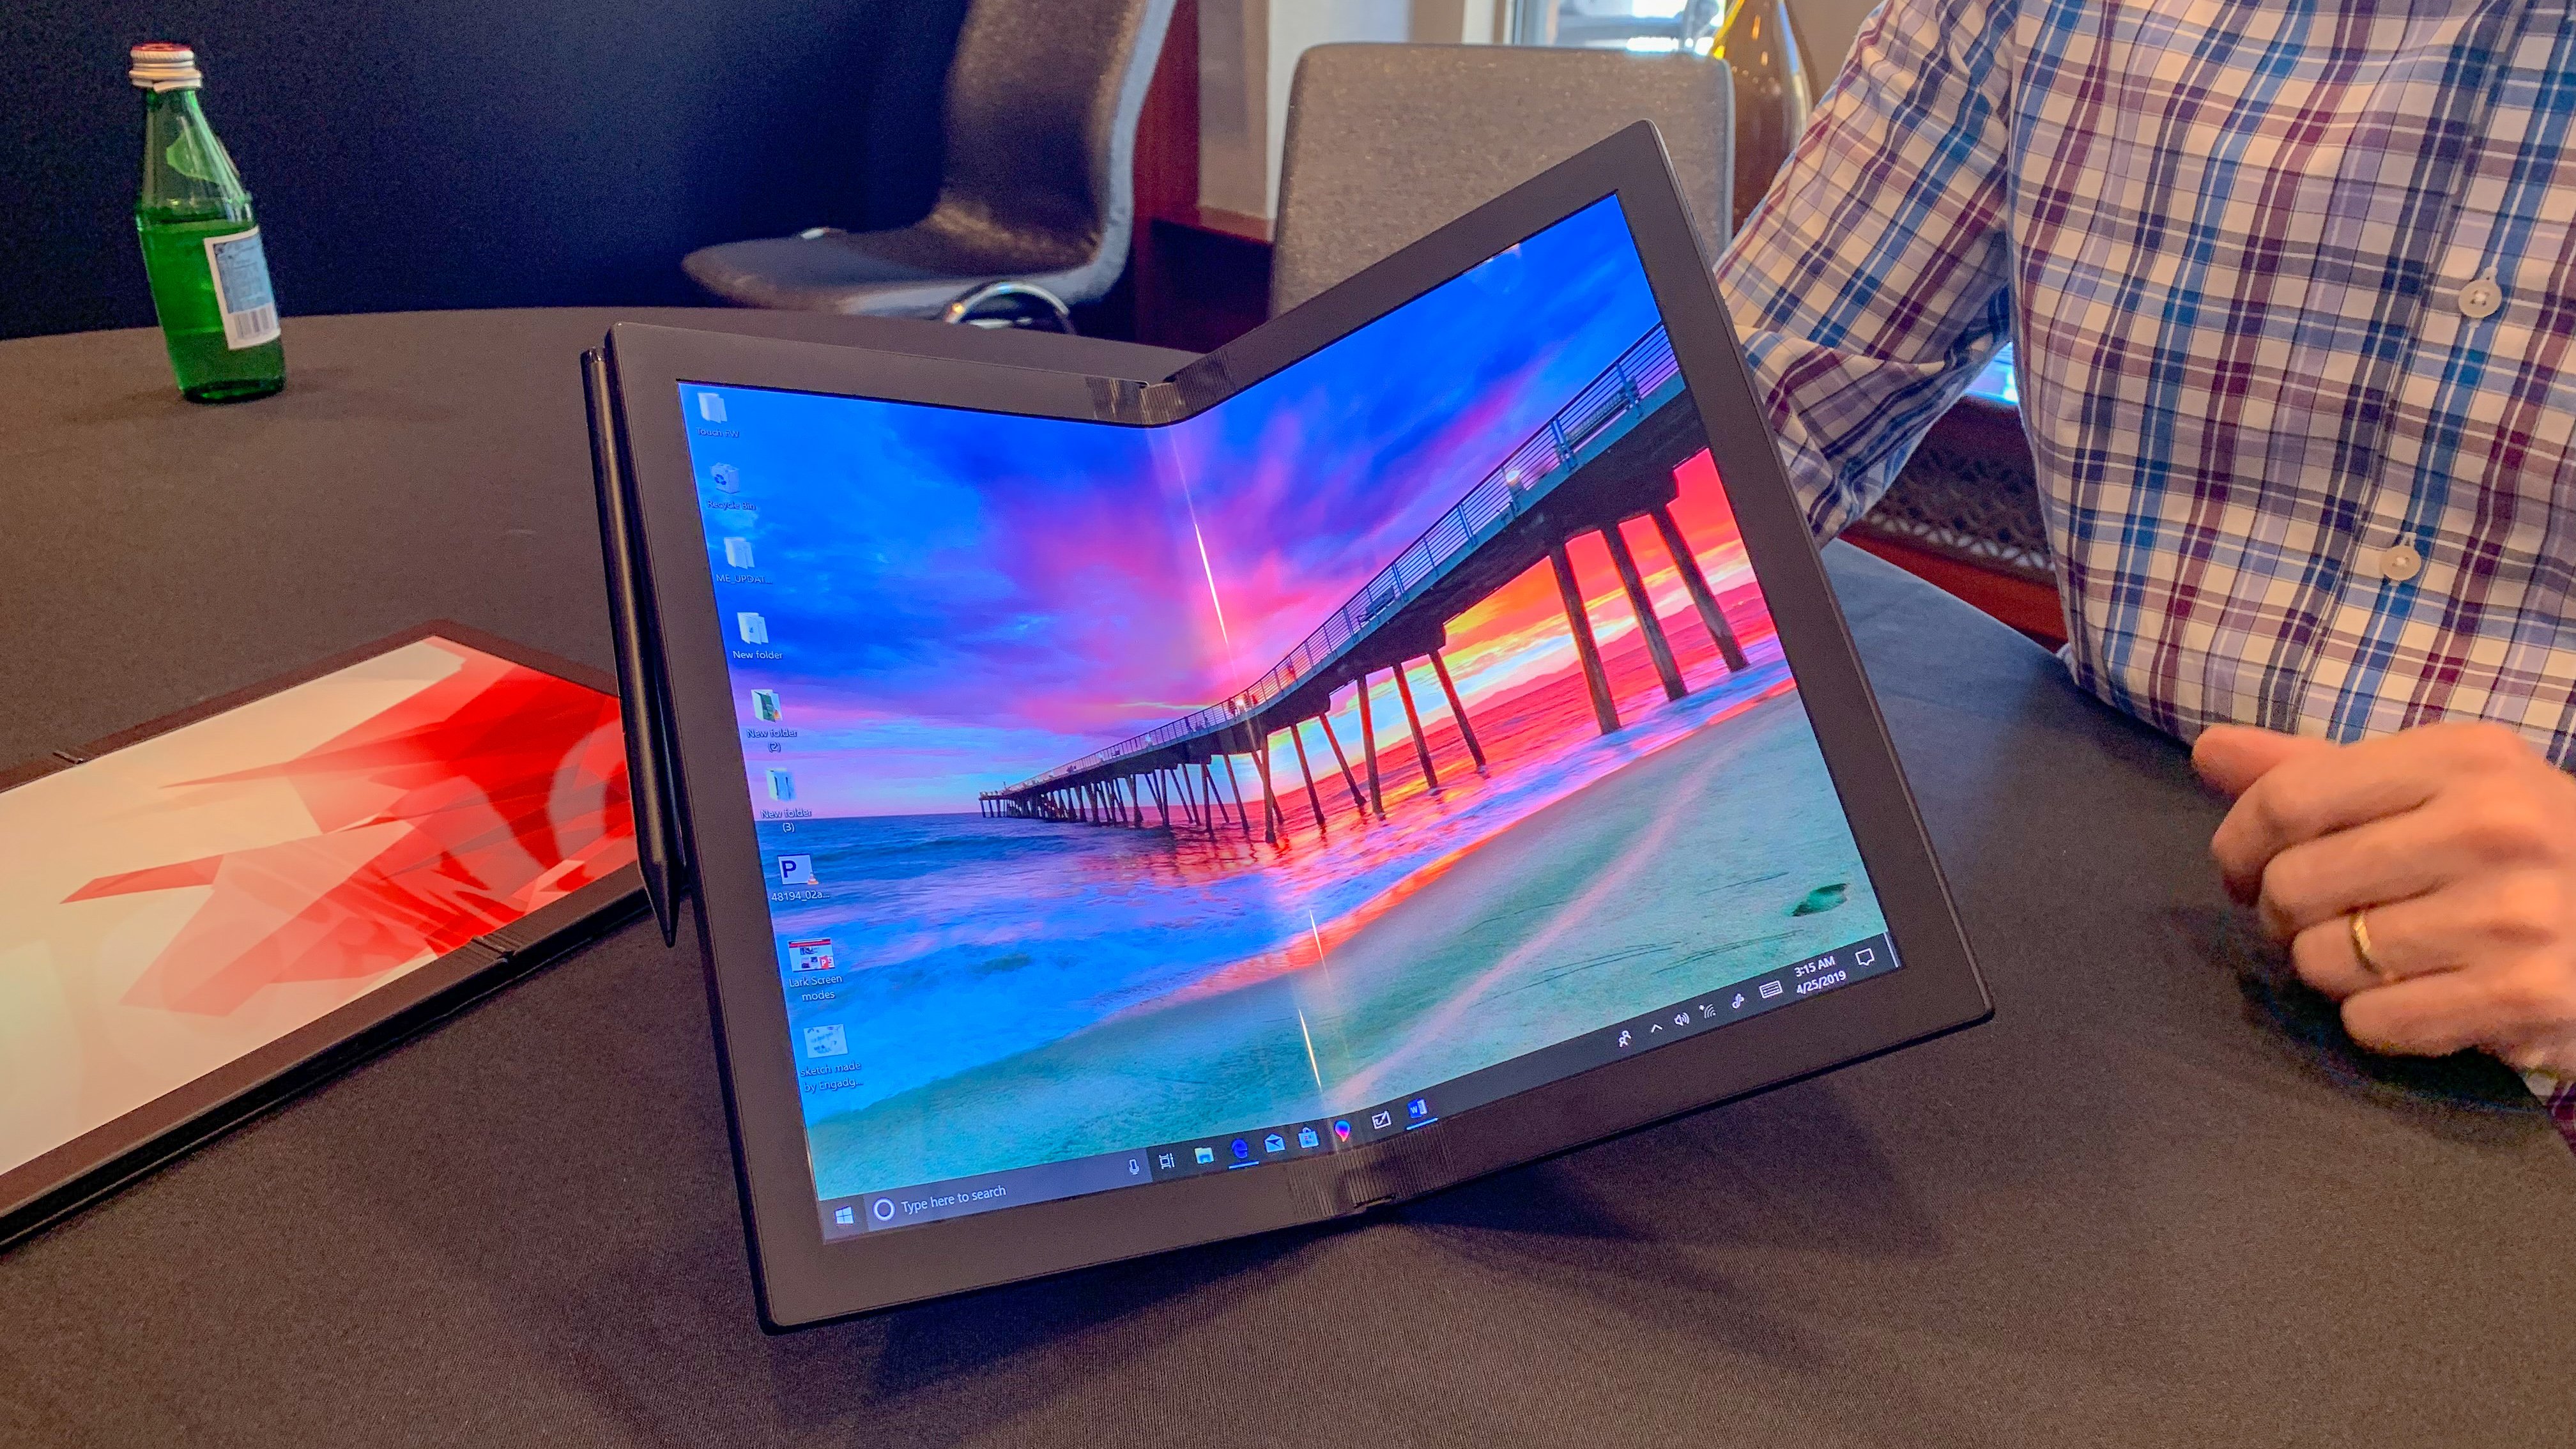 ThinkPad X1 Fold, or how Lenovo presented its new foldable laptop